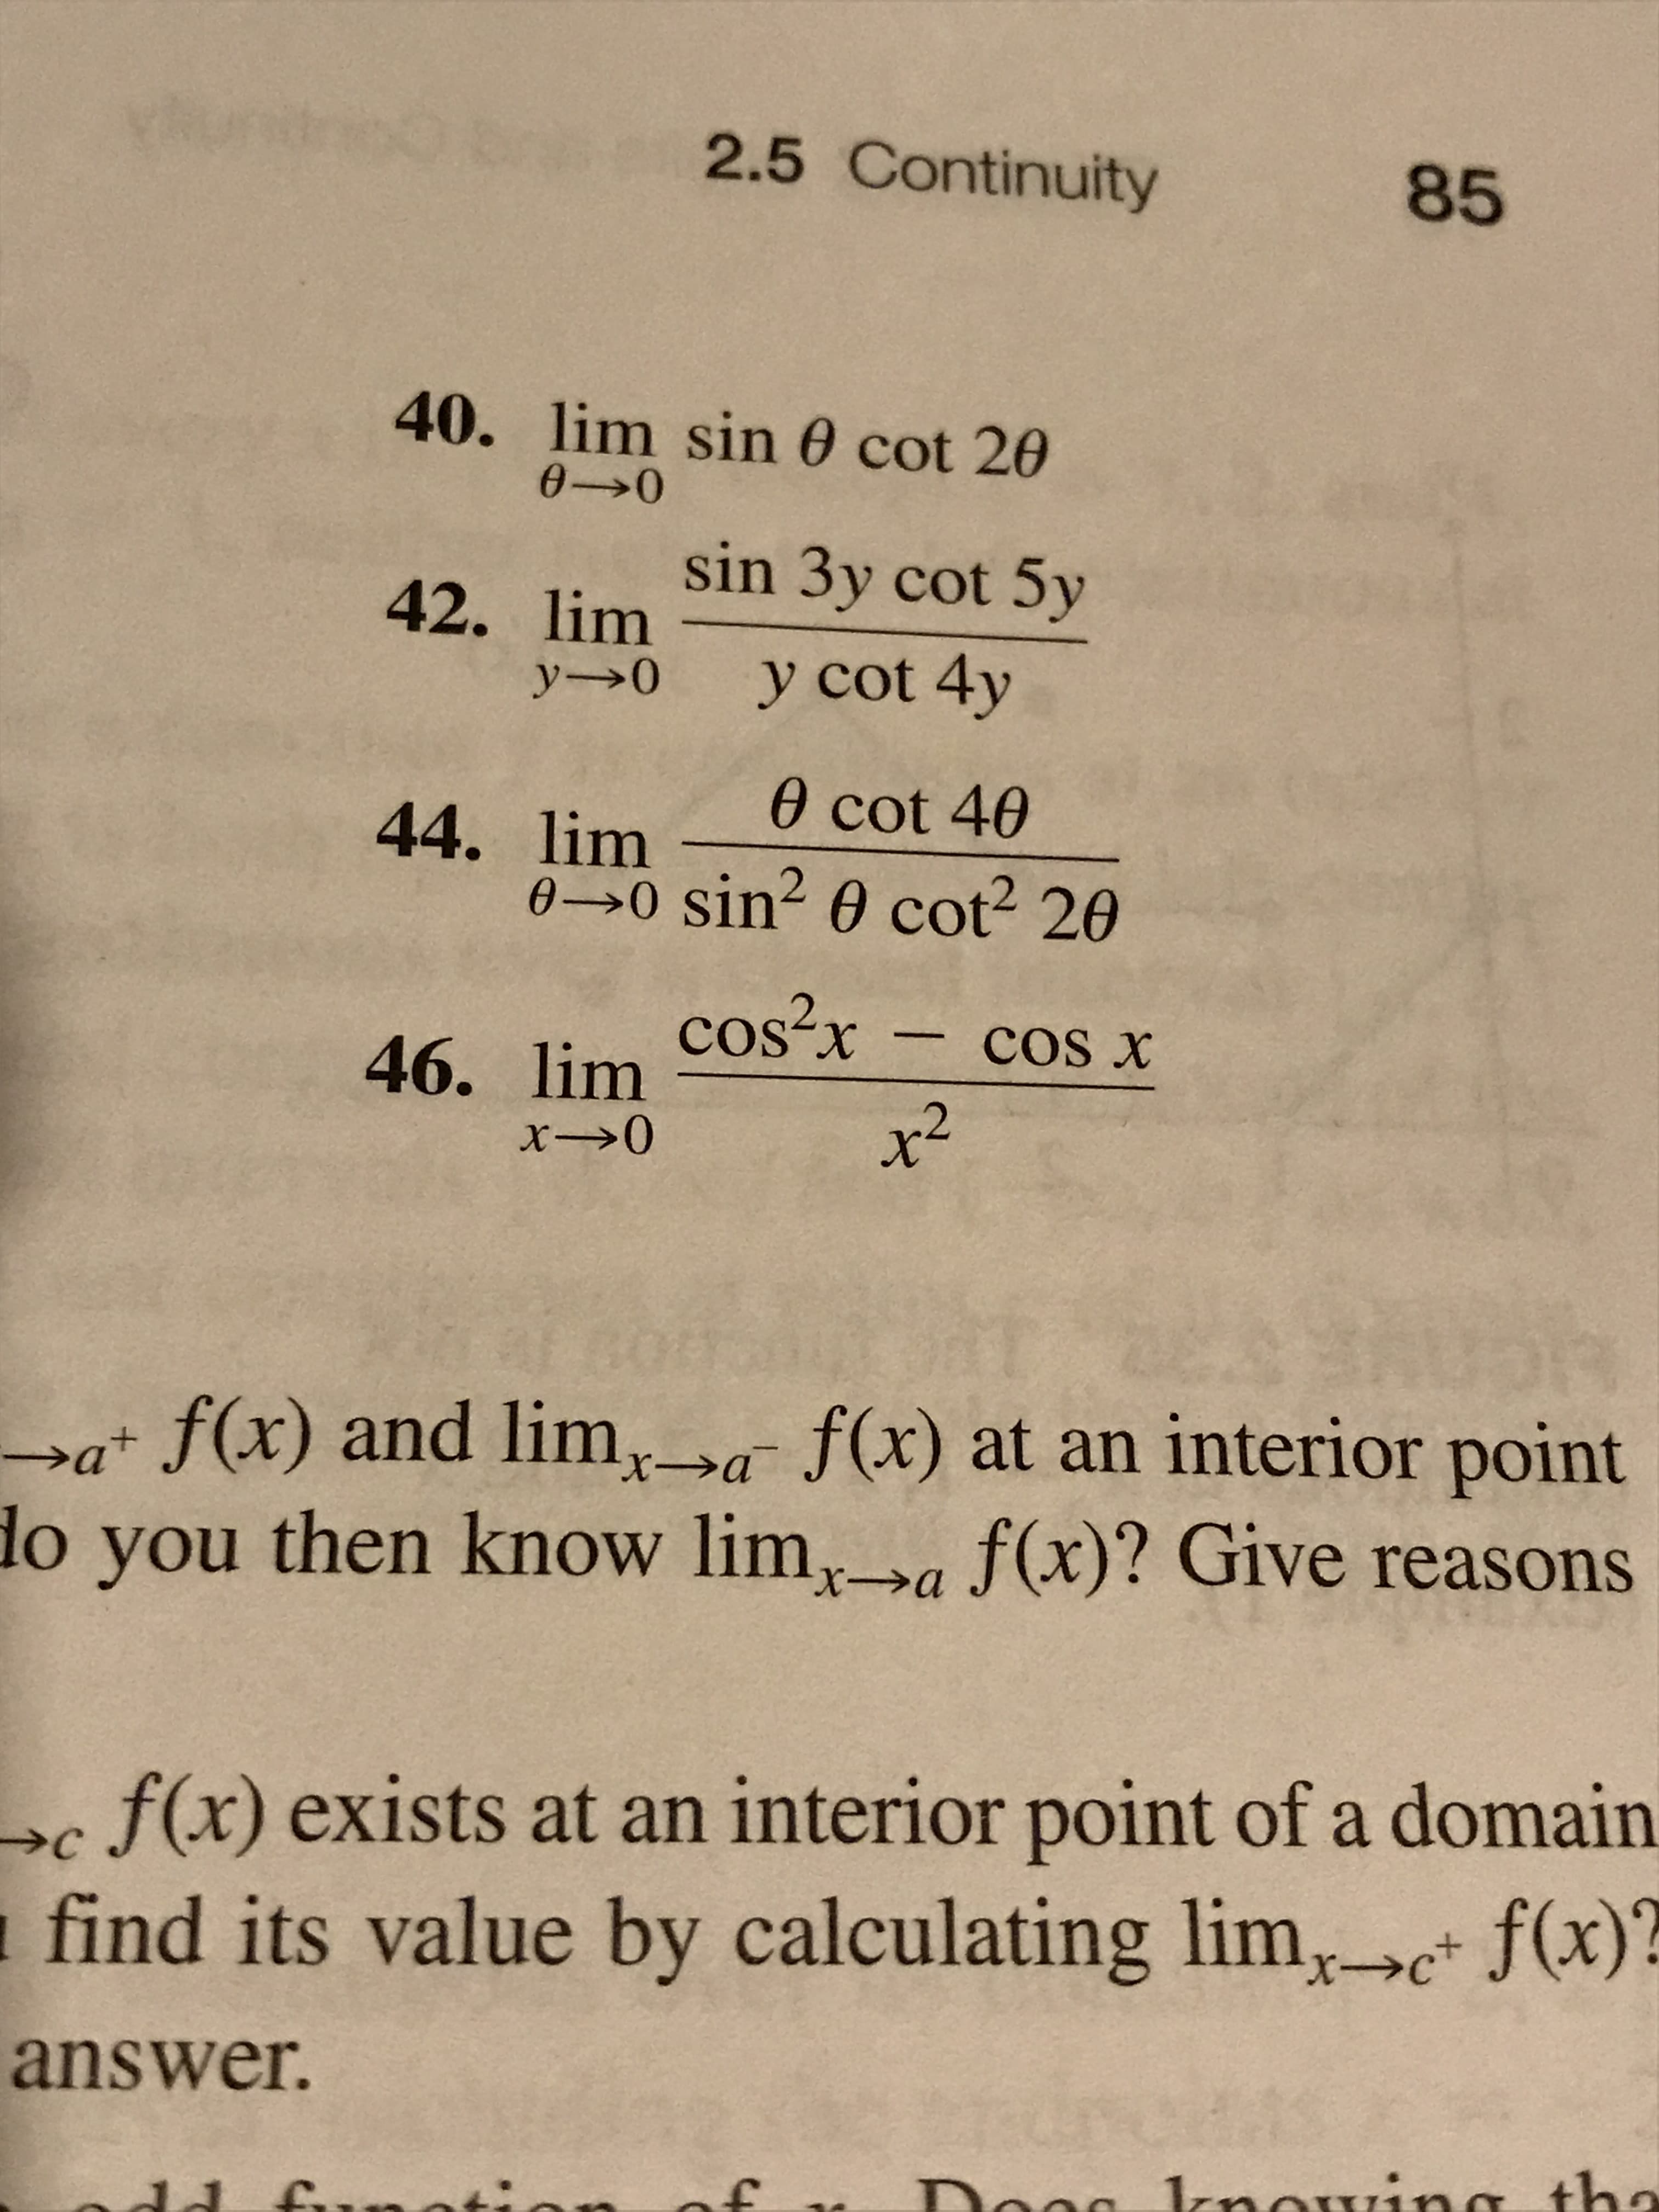 2.5 Continuity
85
40. lim sin 0 cot 20
0- 0
sin 3y cot 5y
42. lim
y cot 4y
y0
0 cot 40
44. lim sin? e cot 20
46. lim Cos2r
x2
COS x
a f(x) and lim,a f(x) at an interior point
do you then know lima f(x)? Give reasons
X-
f(x) exists at an interior point of a domain
find its value by calculating lim, f(x)
C
X-
answer.
Doag lnowinsth
